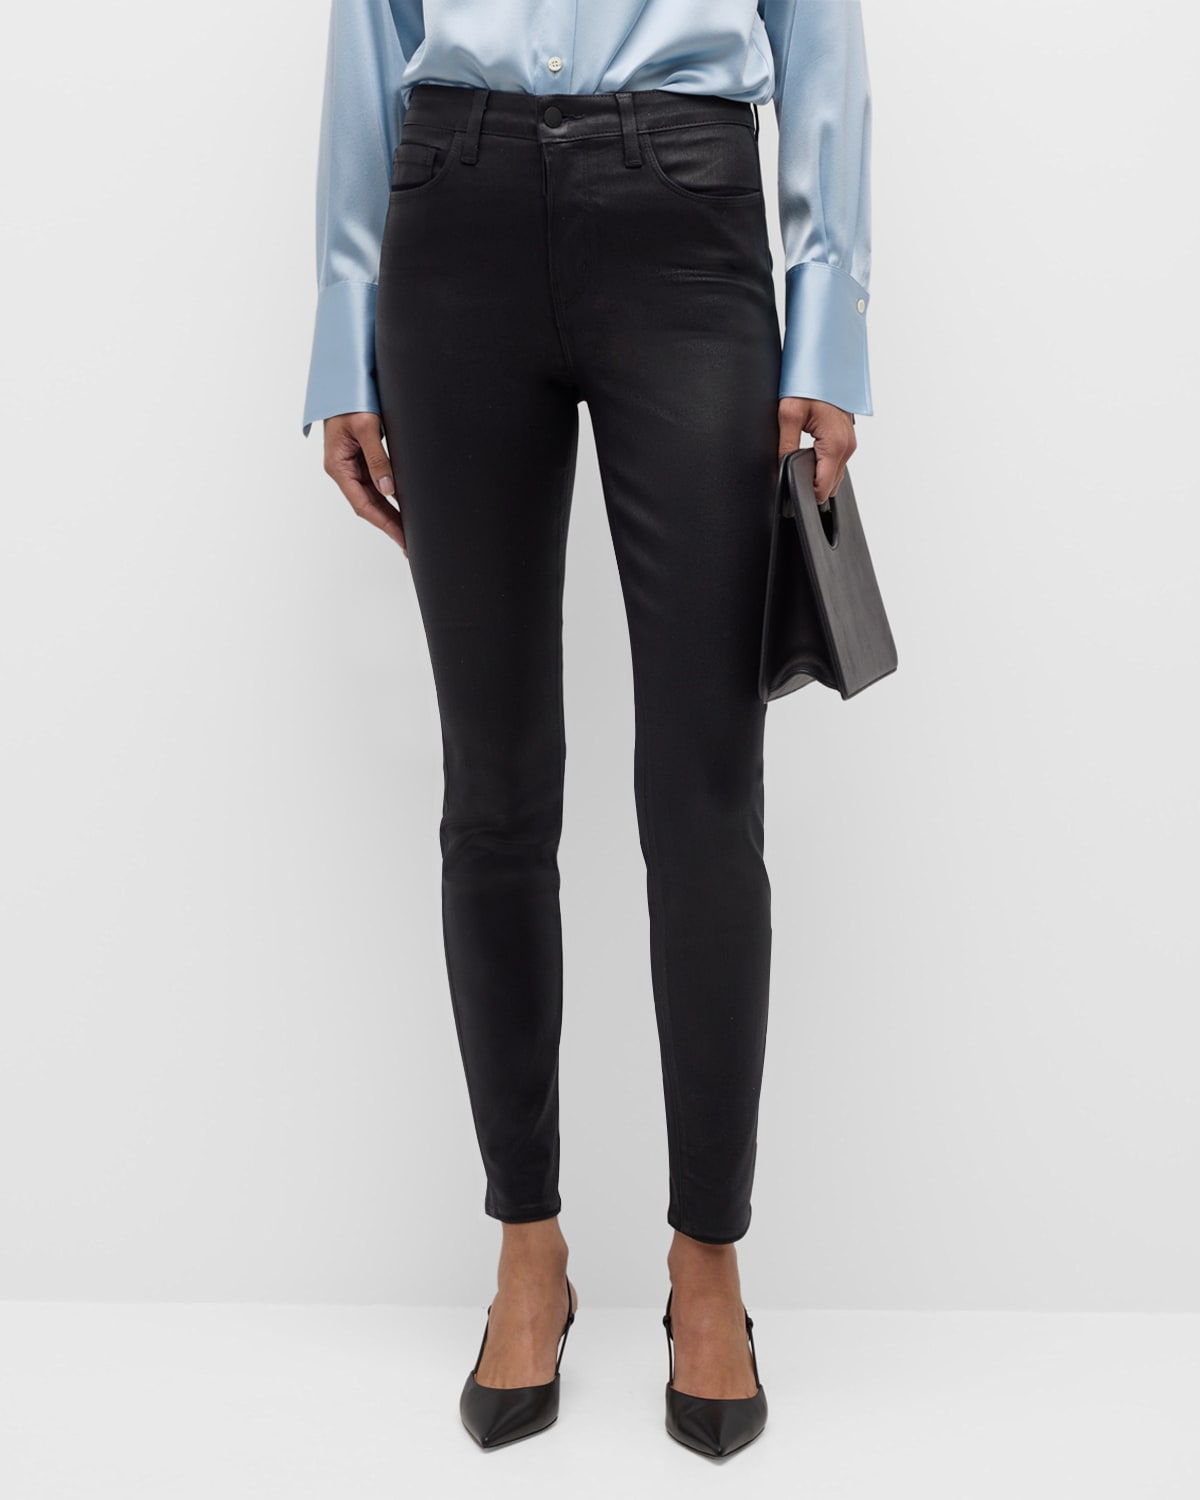 L'Agence Marguerite High-Rise Skinny Jeans | Neiman Marcus